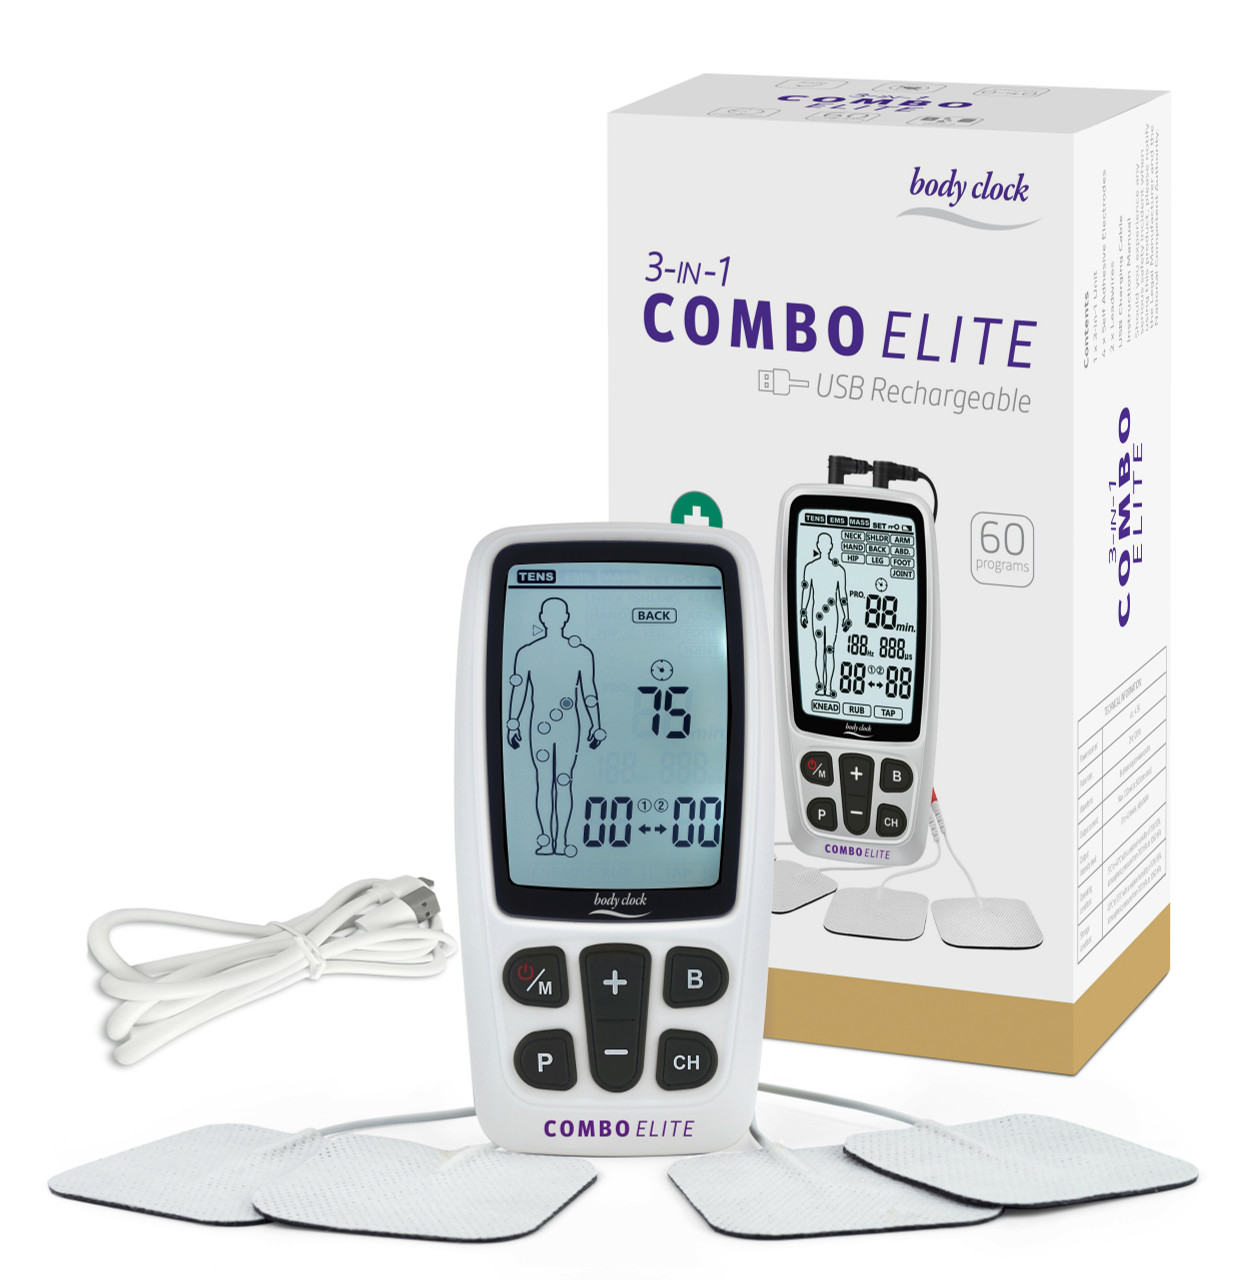 Tens Unit - Profile TENS from Body Clock